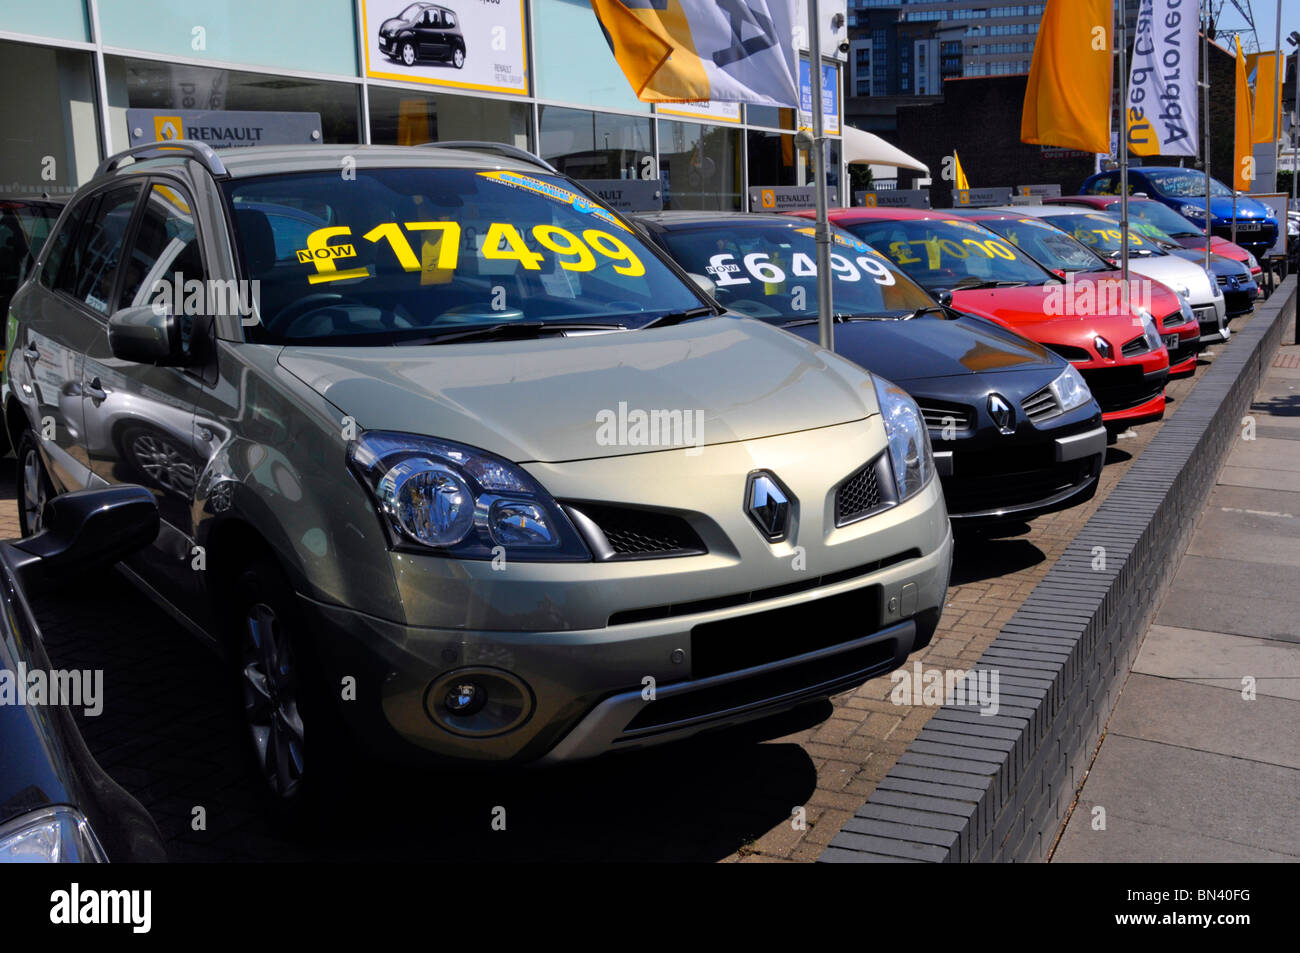 Renault car dealer forecourt display of cars Stock Photo